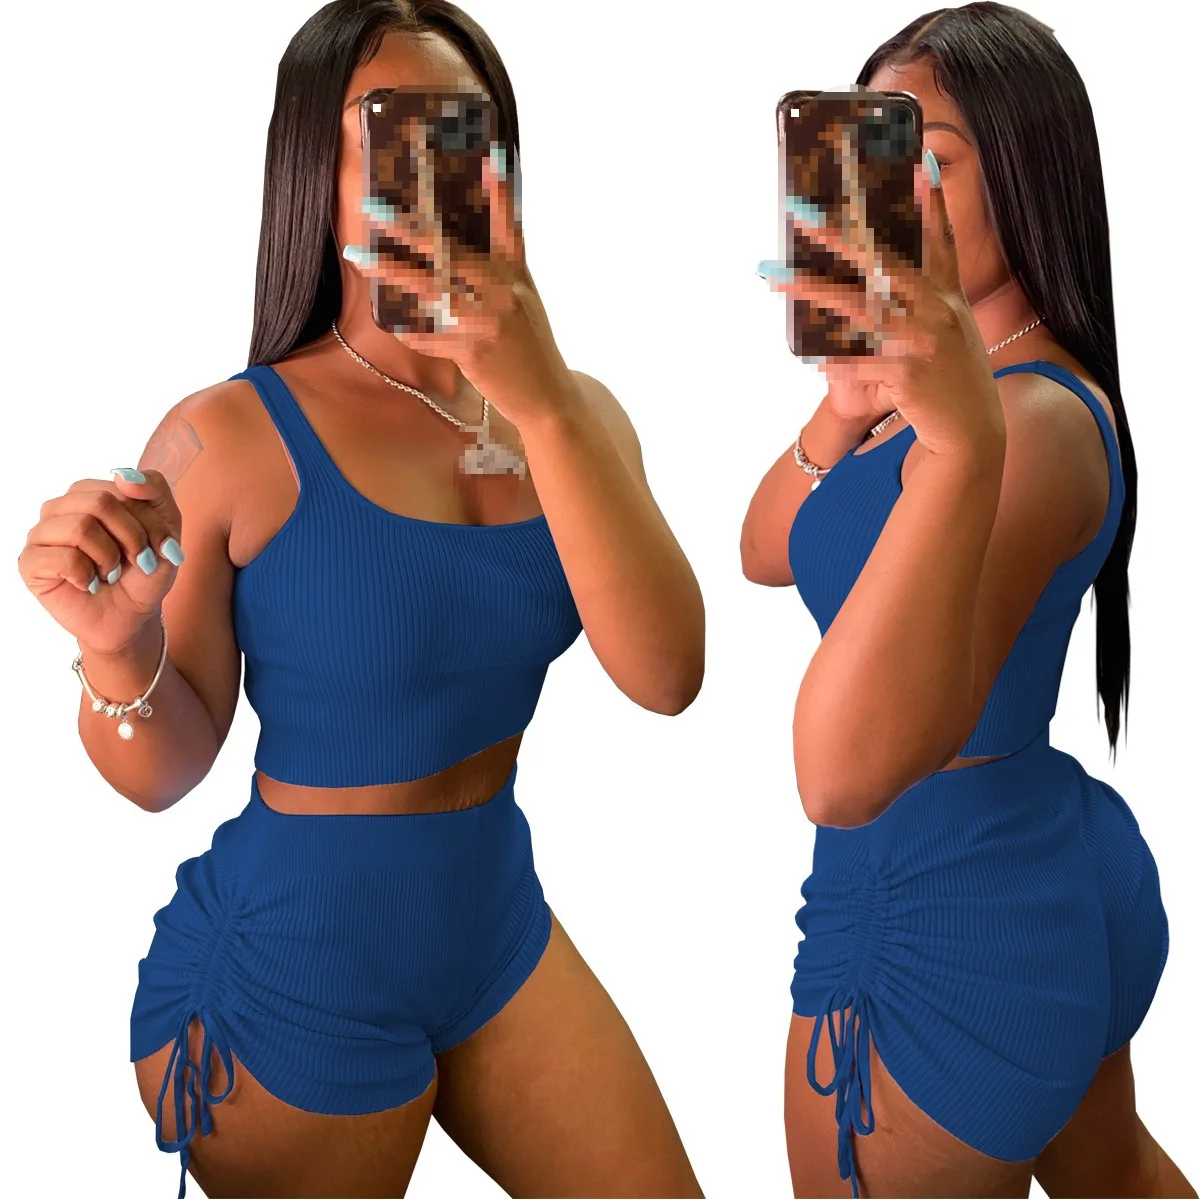 loungewear sets two piece set women 2 piece sets women outfits shorts set women spring summer 2021summer clothes short suits club outfit plus size bra and panty sets